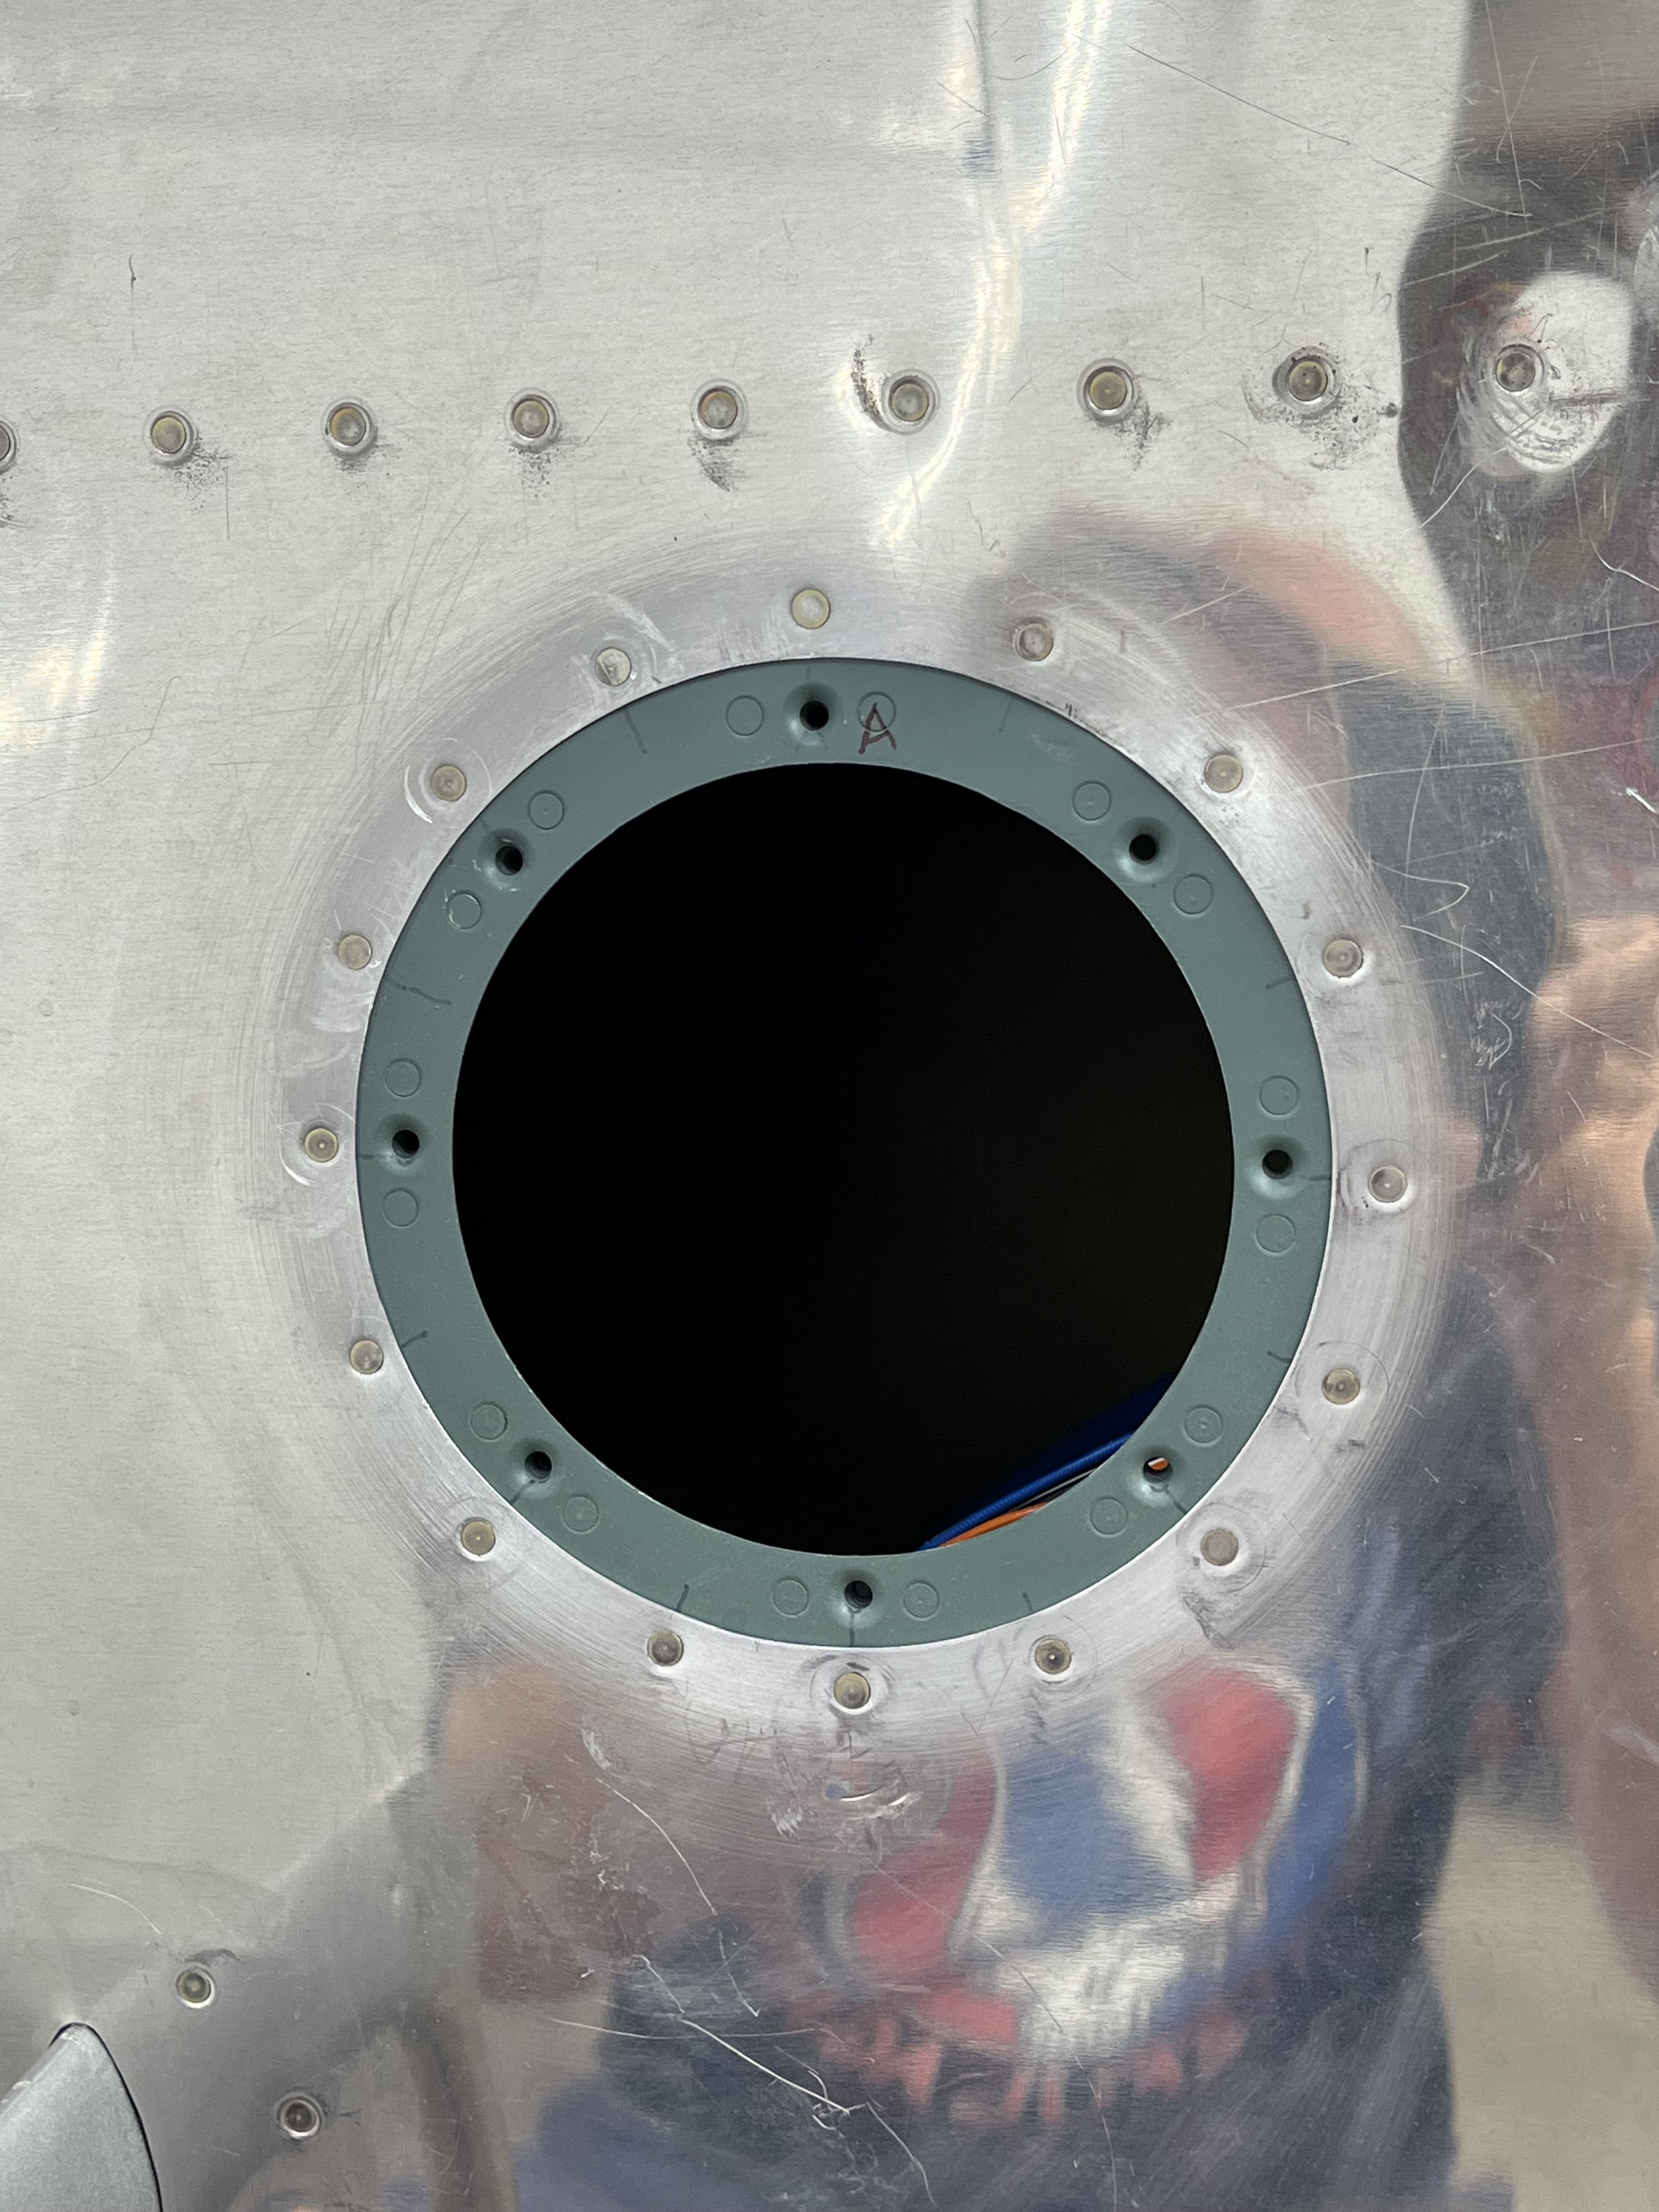 Wing Port Access Hole MOunted.jpg